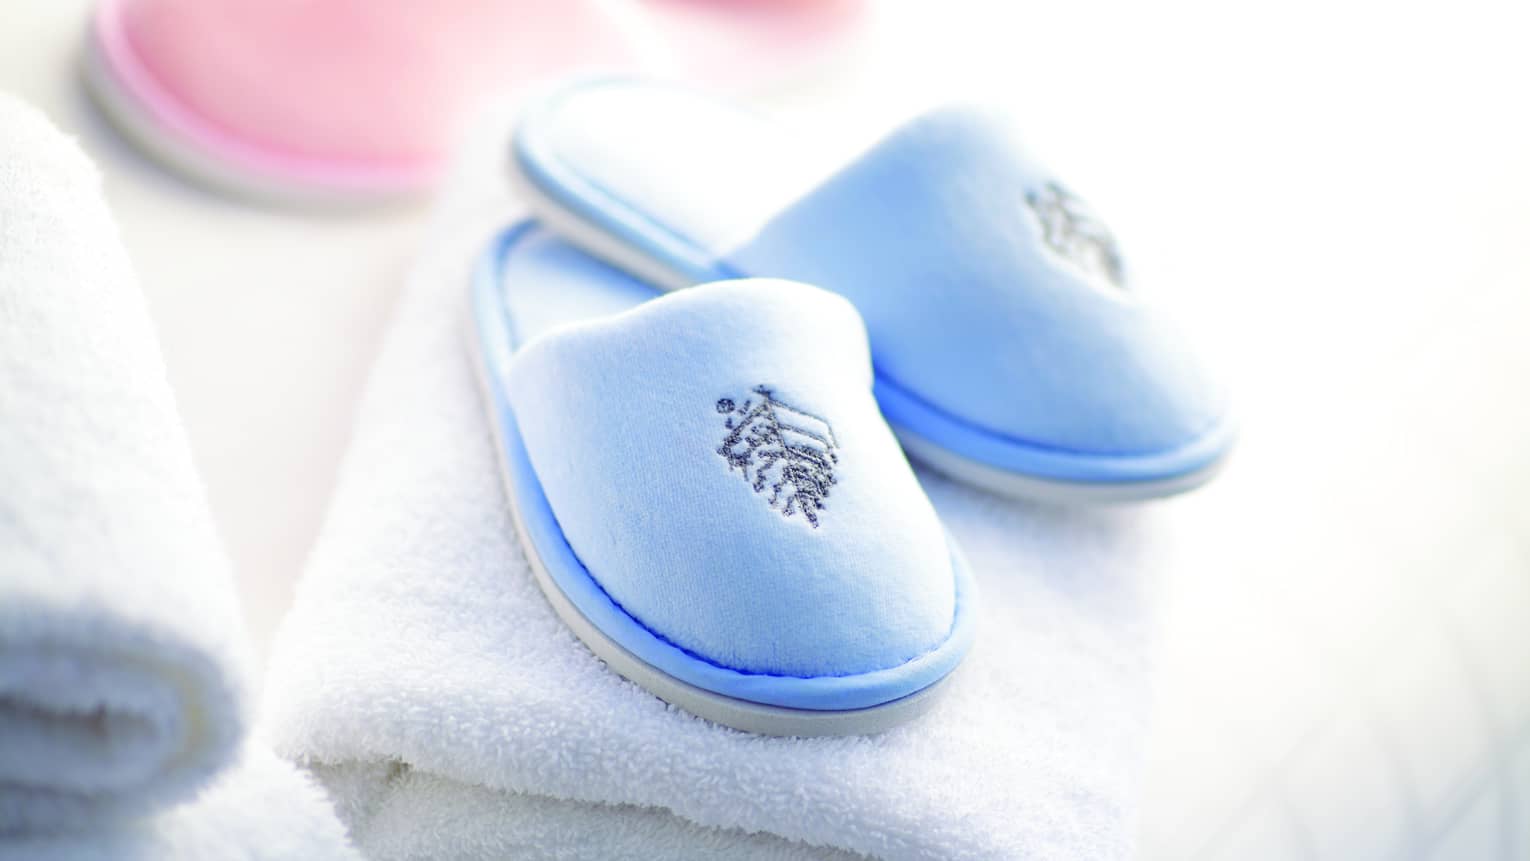 A pair of baby pink and baby blue kid's spa slippers and fluffy white towels